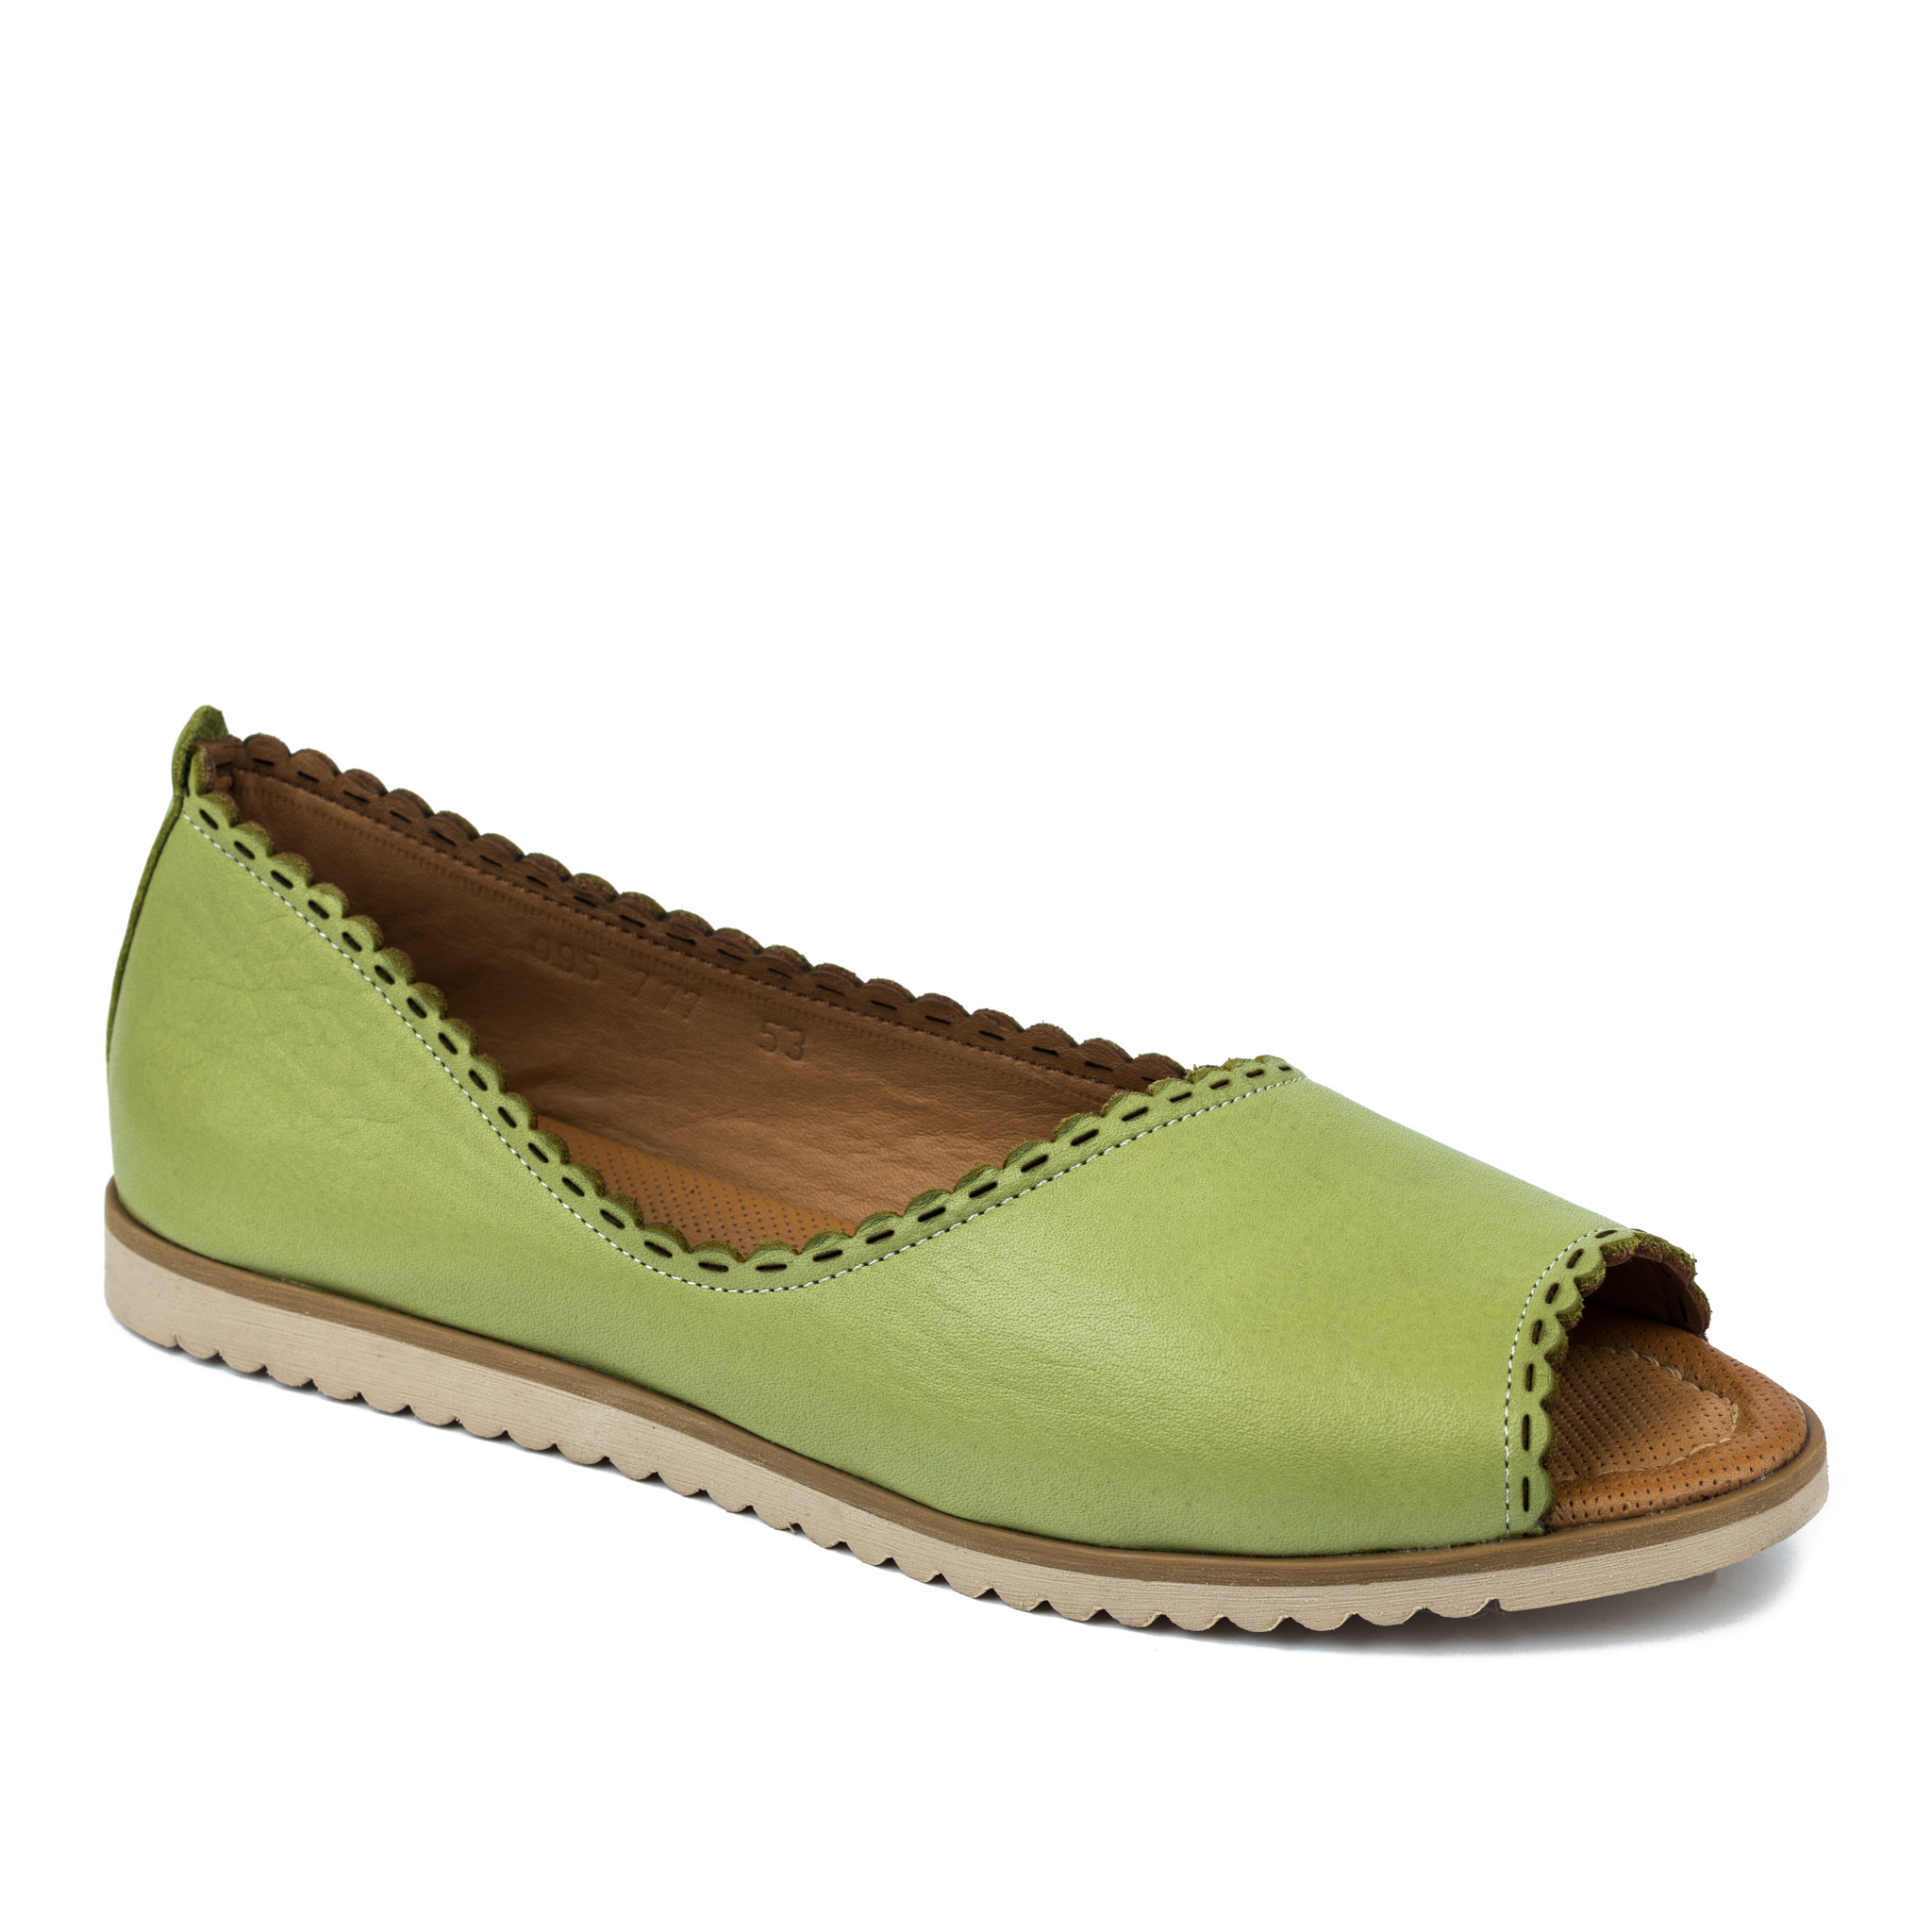 Leather sandals A680 - GREEN